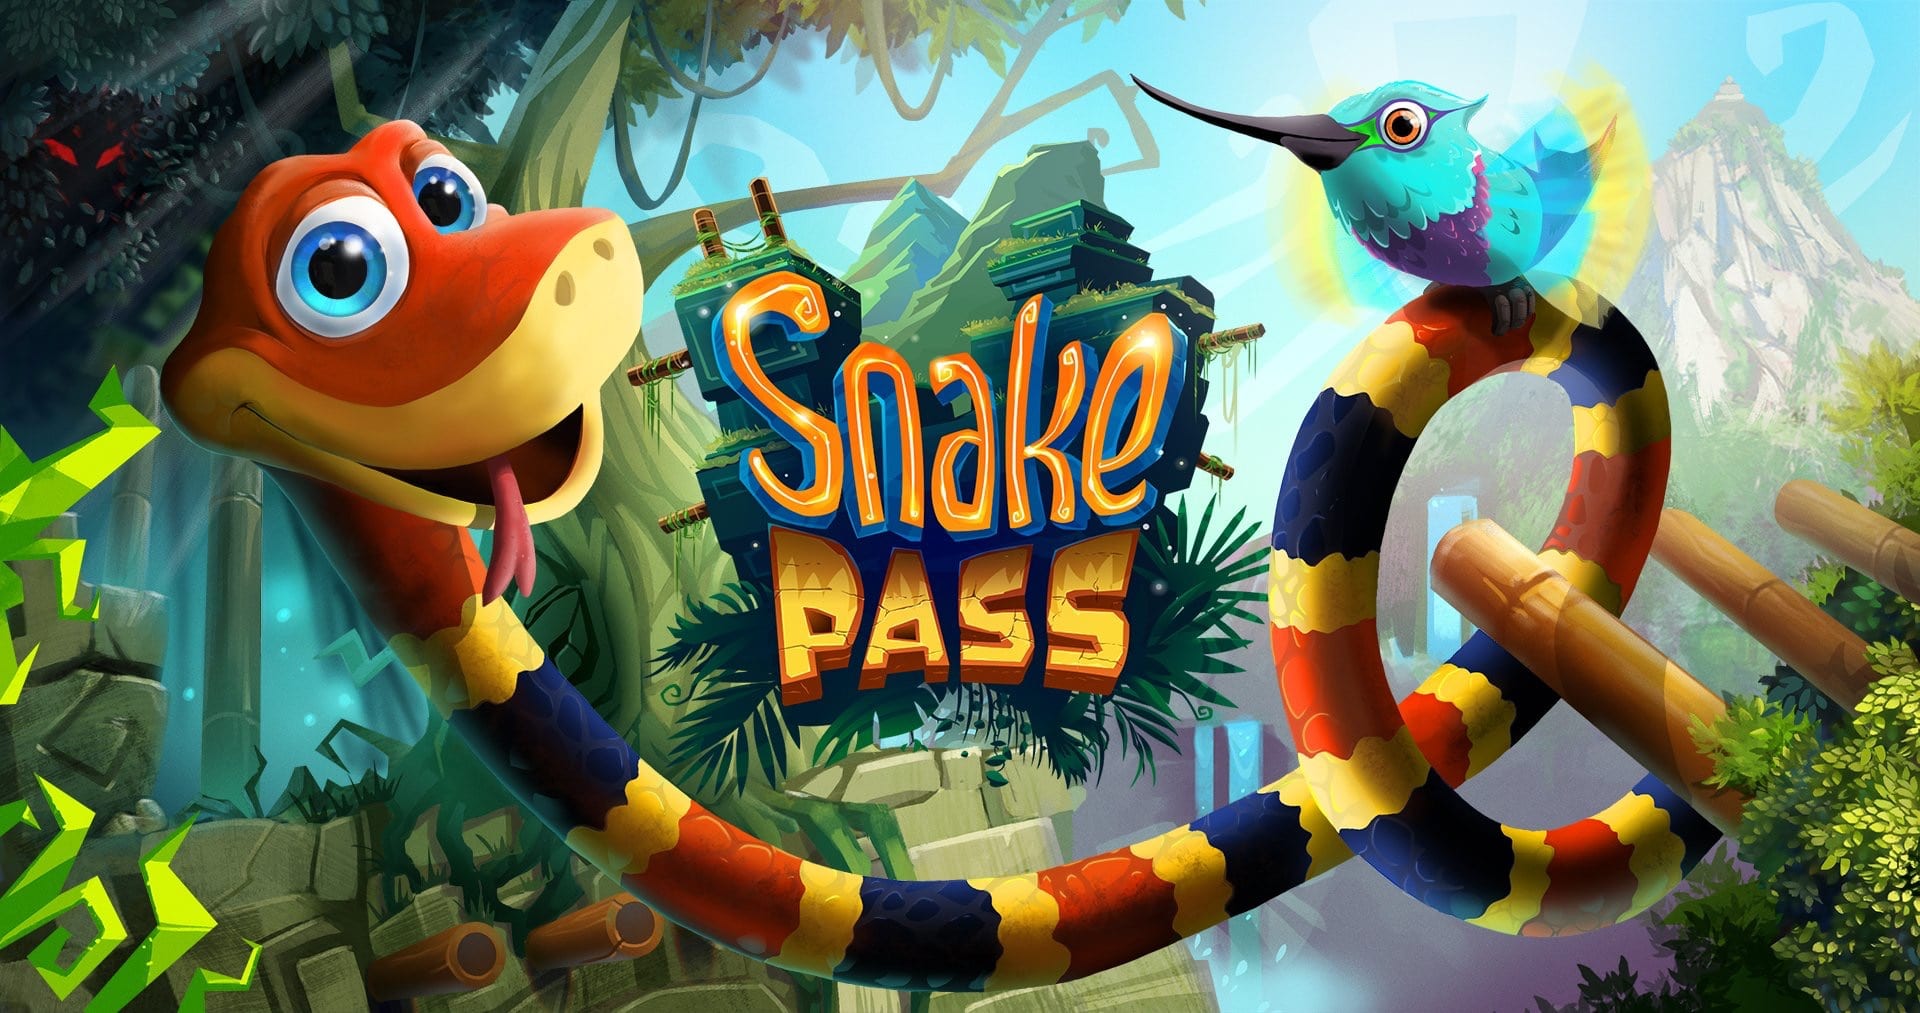 Featured Image for Haigh Family: Test Snake Pass 